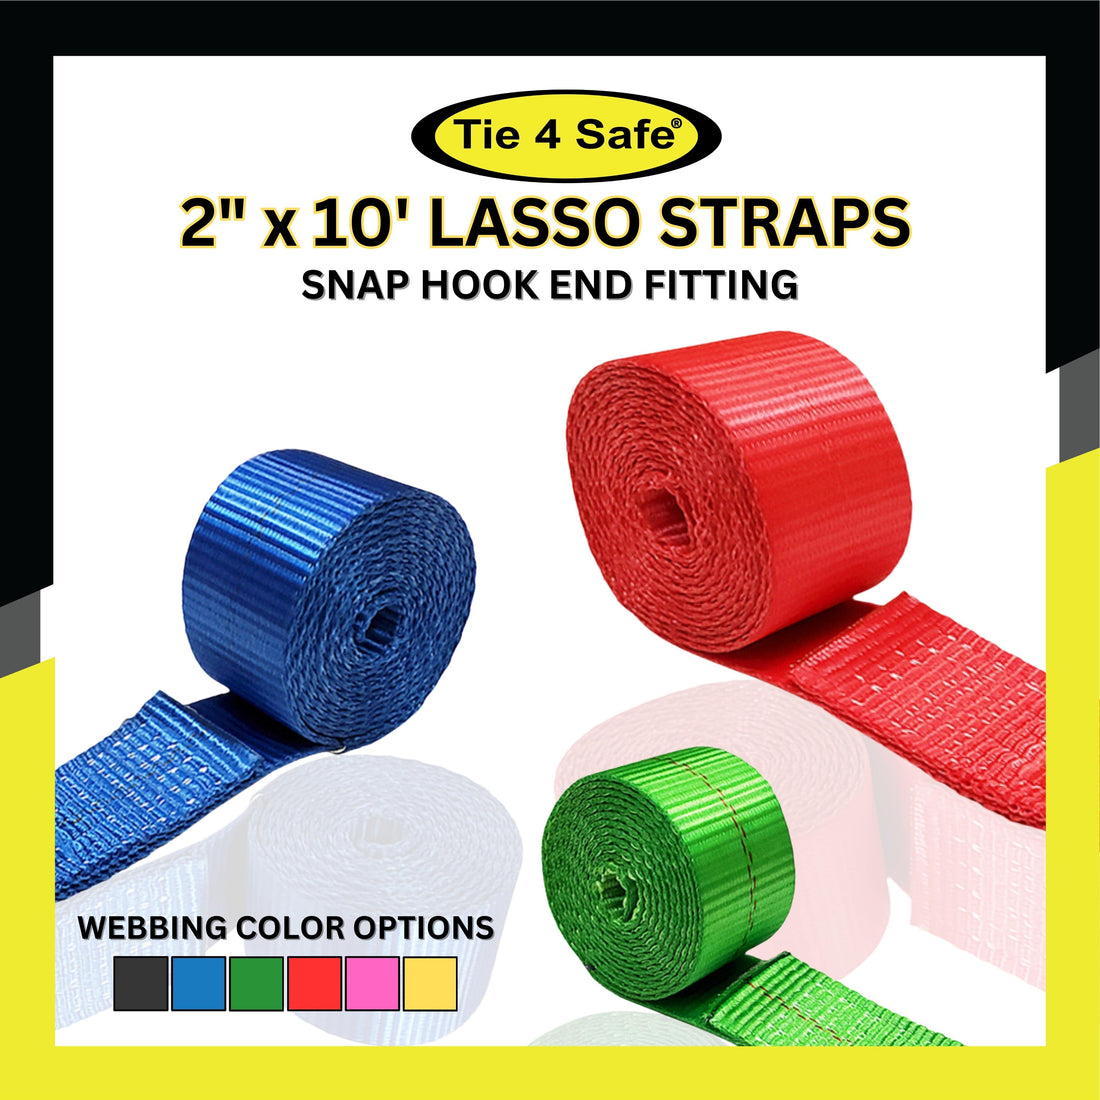 2" x 10' Wheel Lift Rollback Strap With Flat Snap Hook